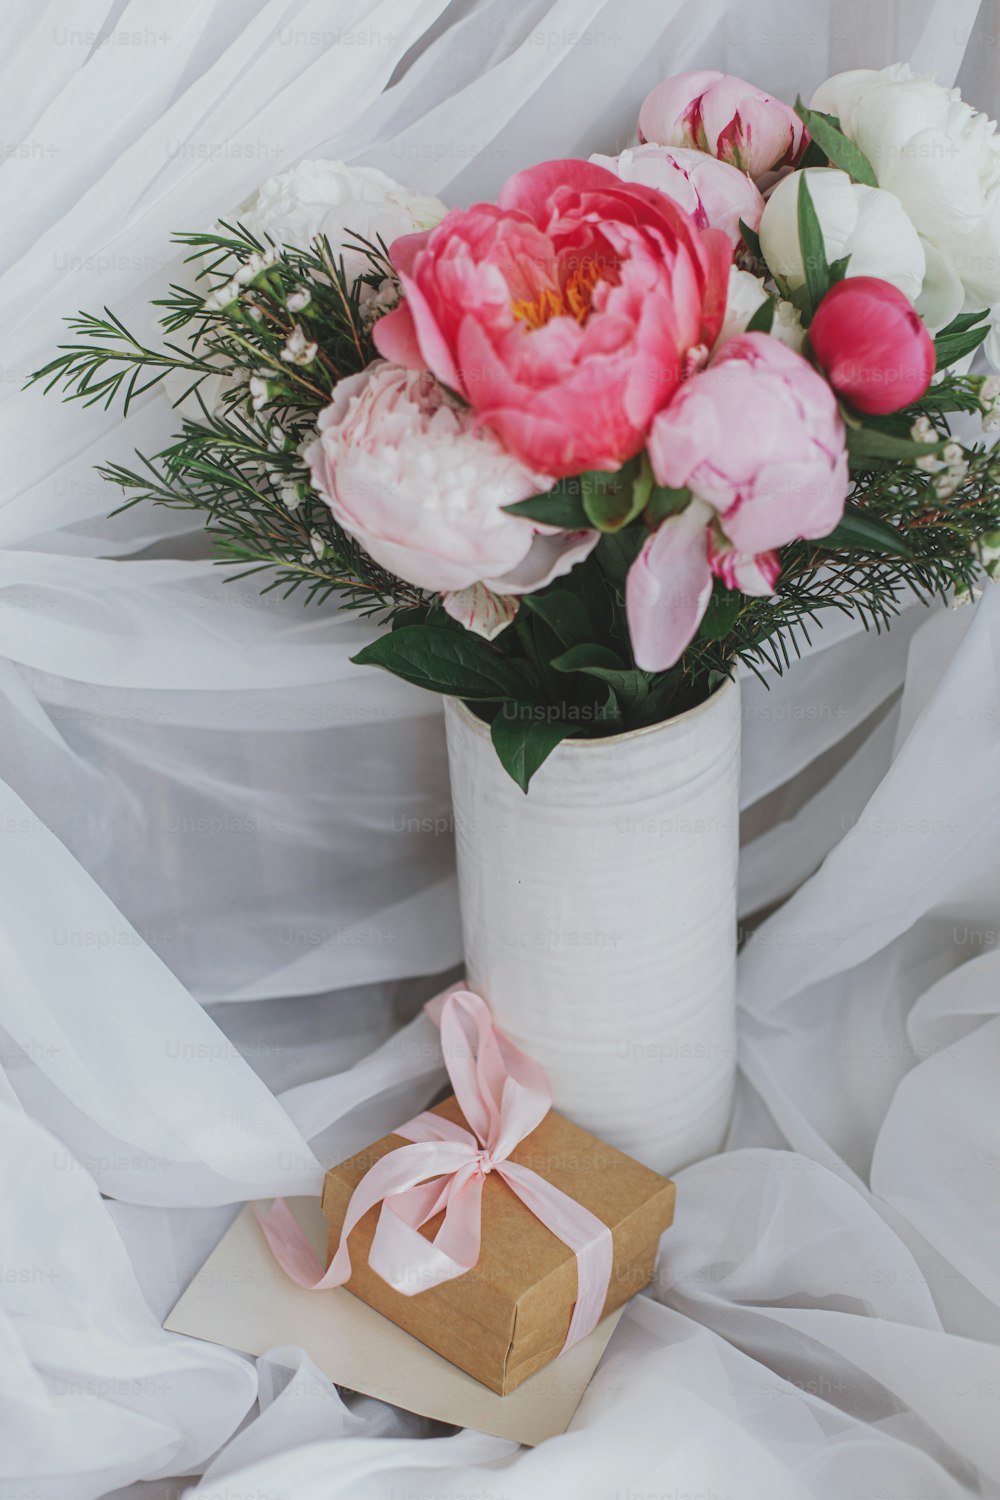 Beautiful stylish peonies bouquet, gift box and greeting card on background of soft white fabric. Pink and white peony flowers in ceramic vase. Happy Mothers day. Bridal morning